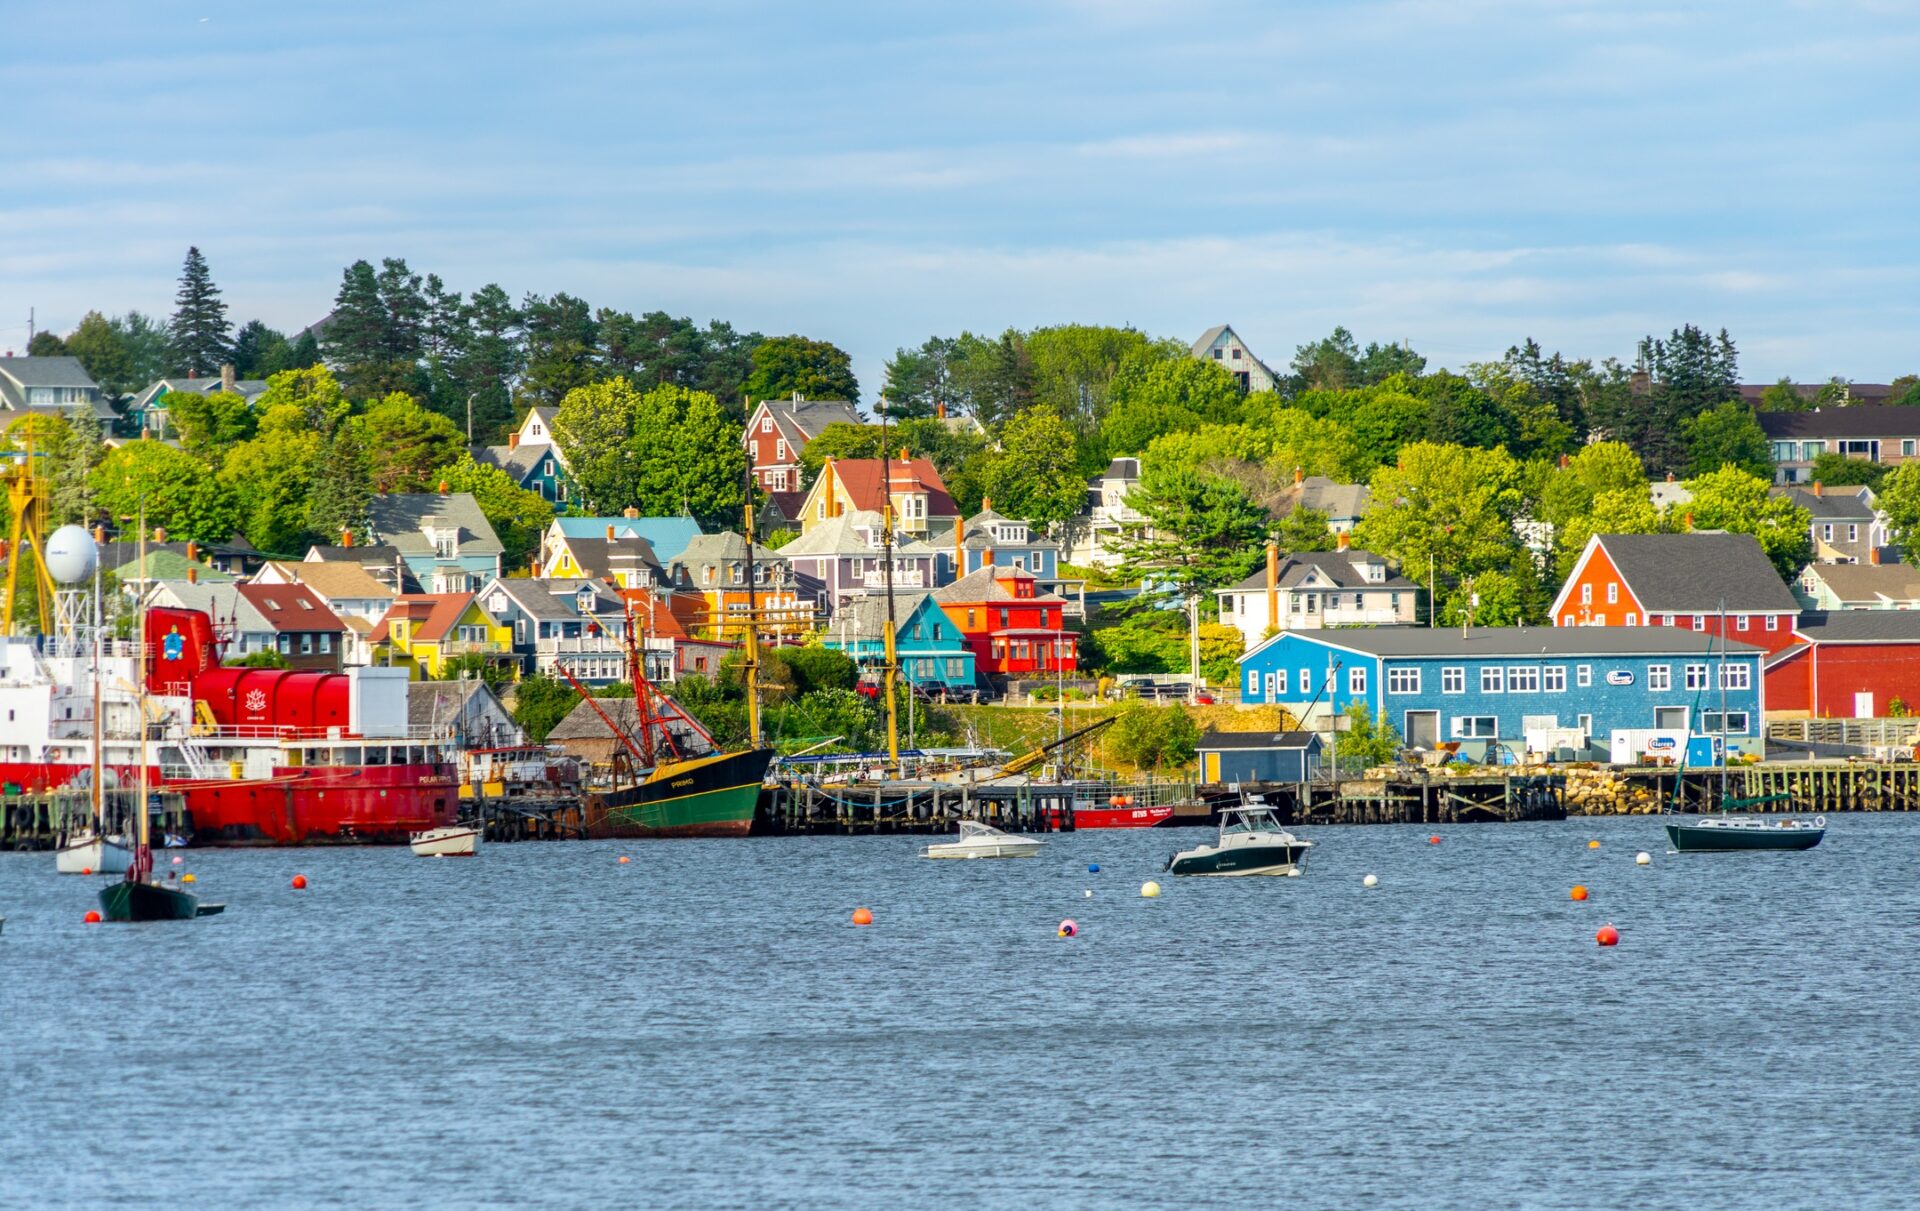 view of the town of lunenberg from the water on our Nova Scotia RV road trip